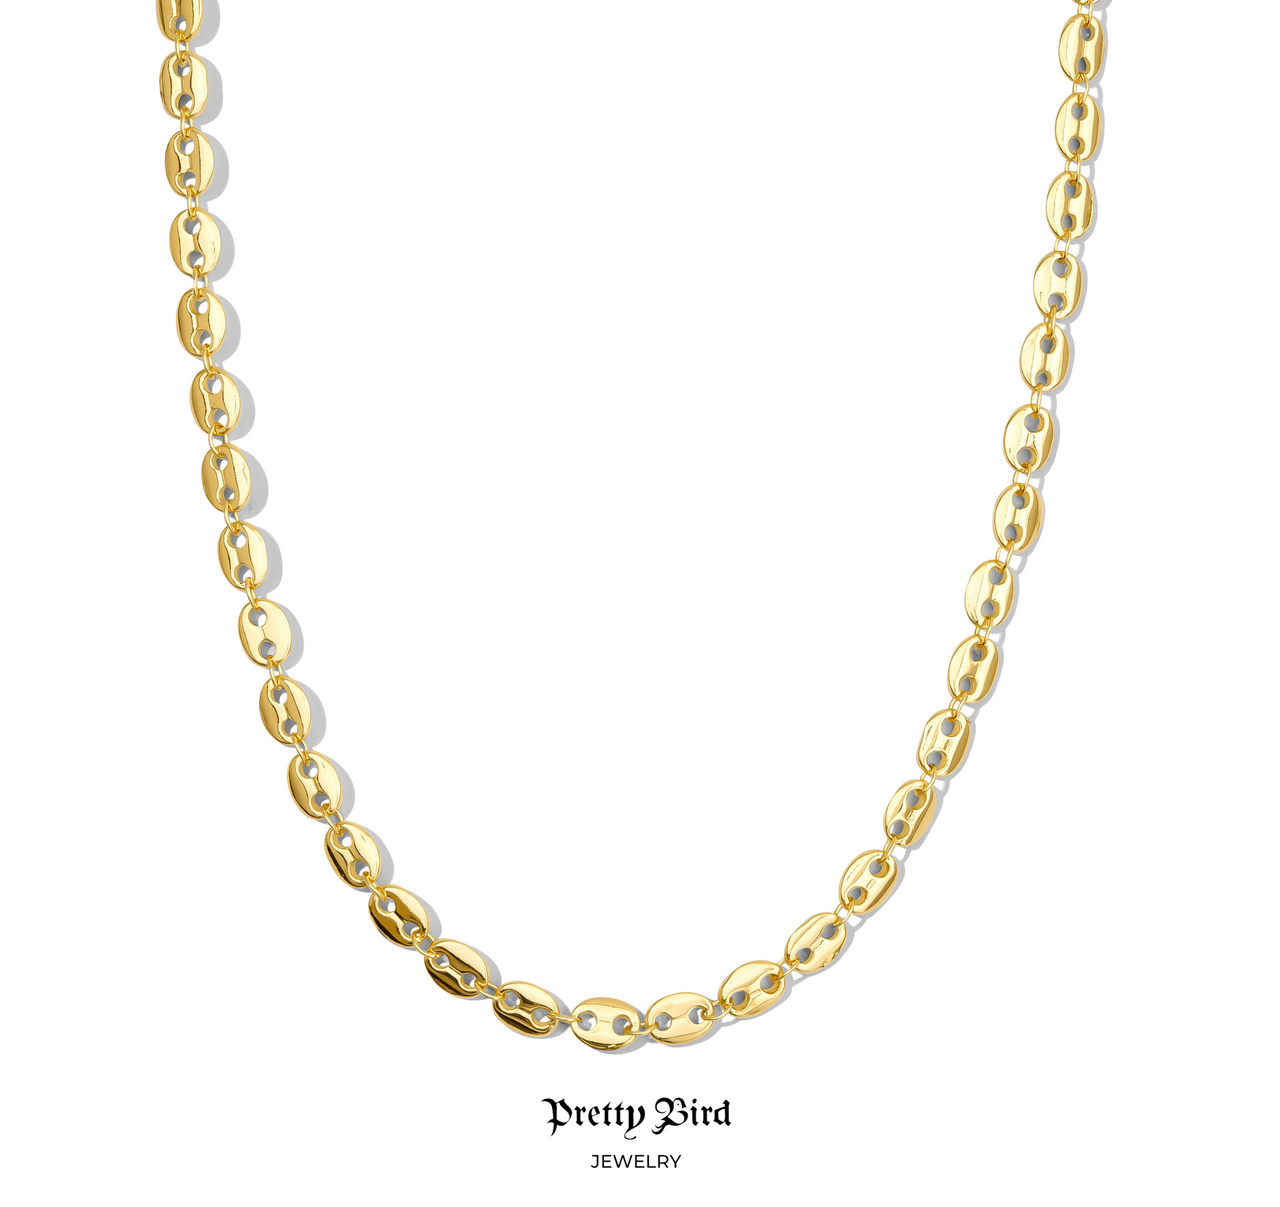 The Puffed Mariner Chain Necklace